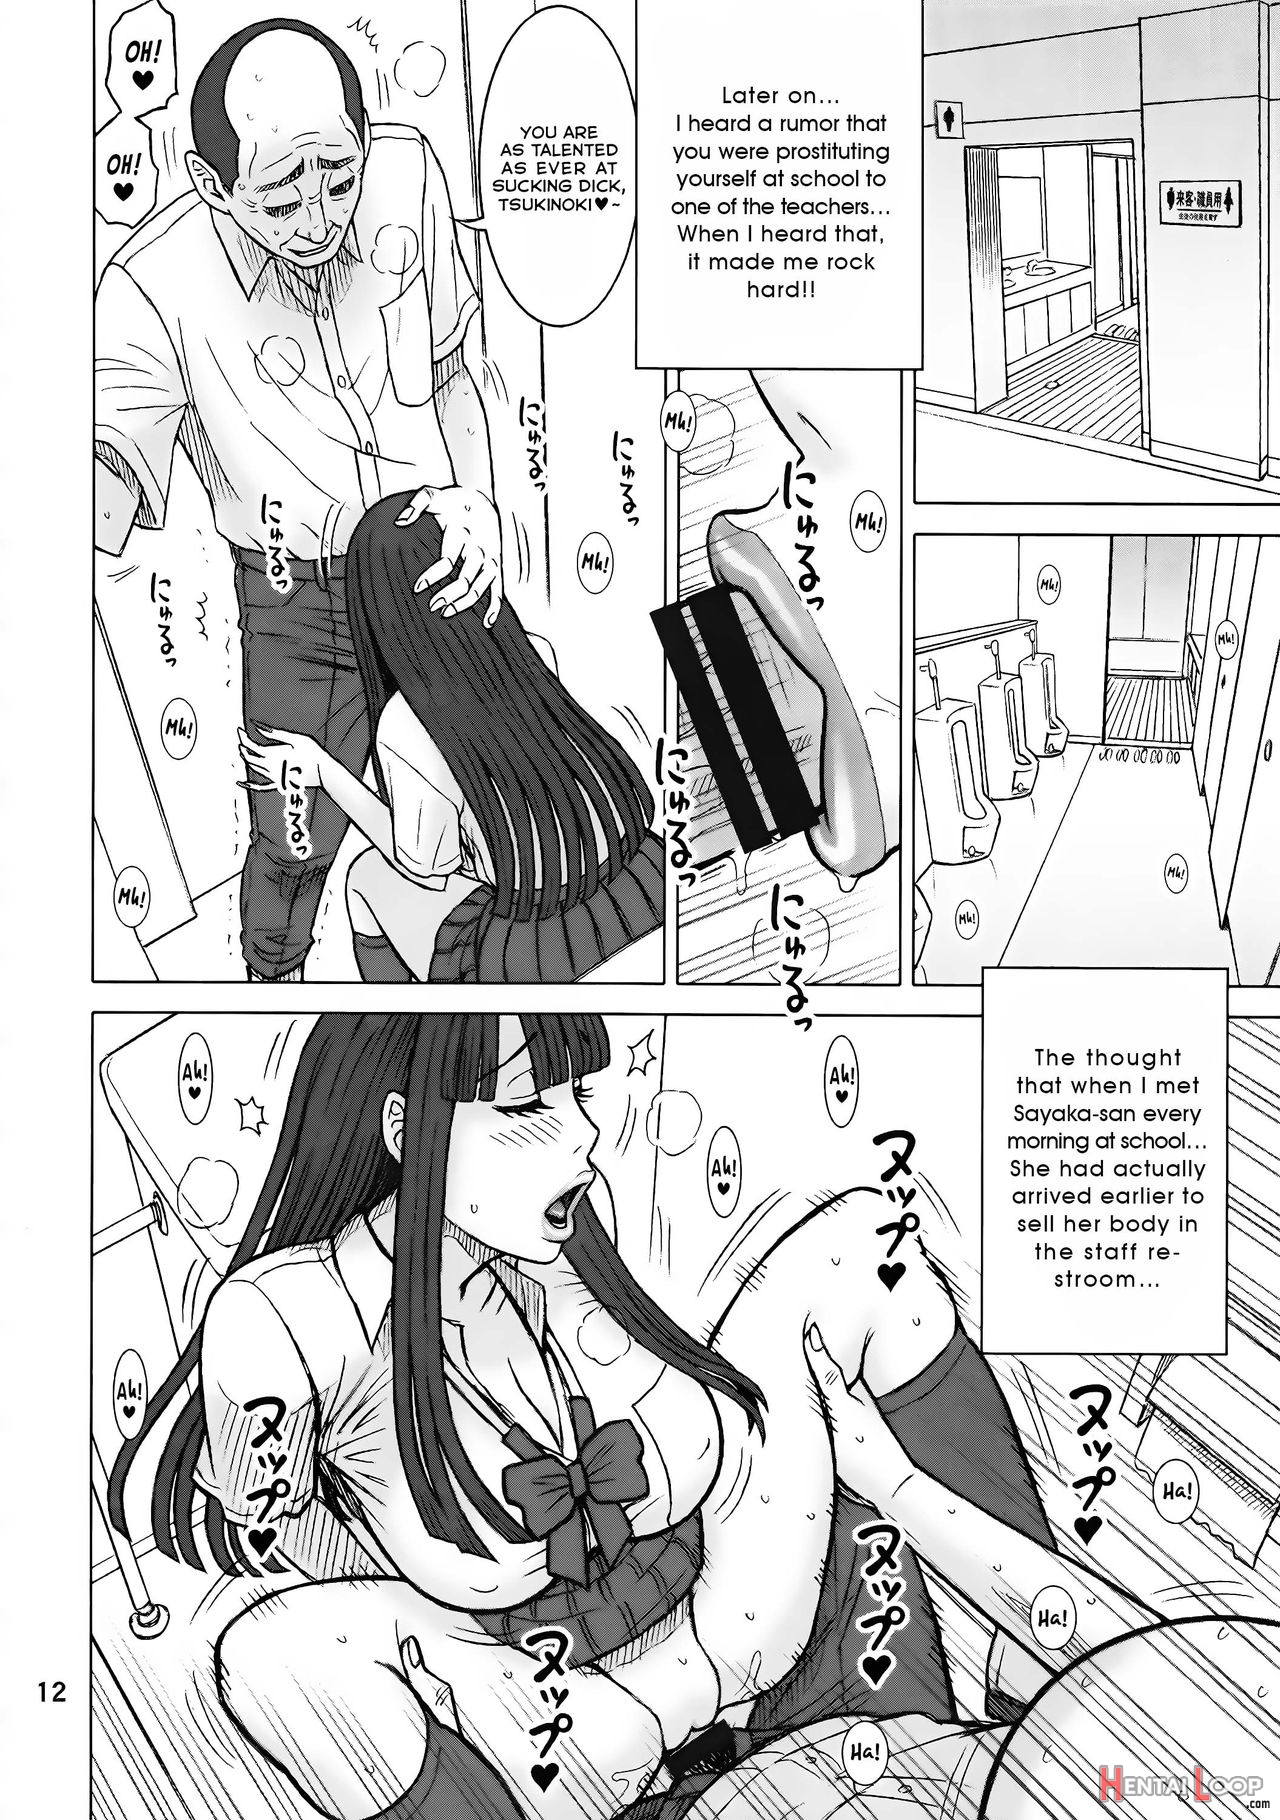 Buying A Classmate Story ~afterwards~ page 11